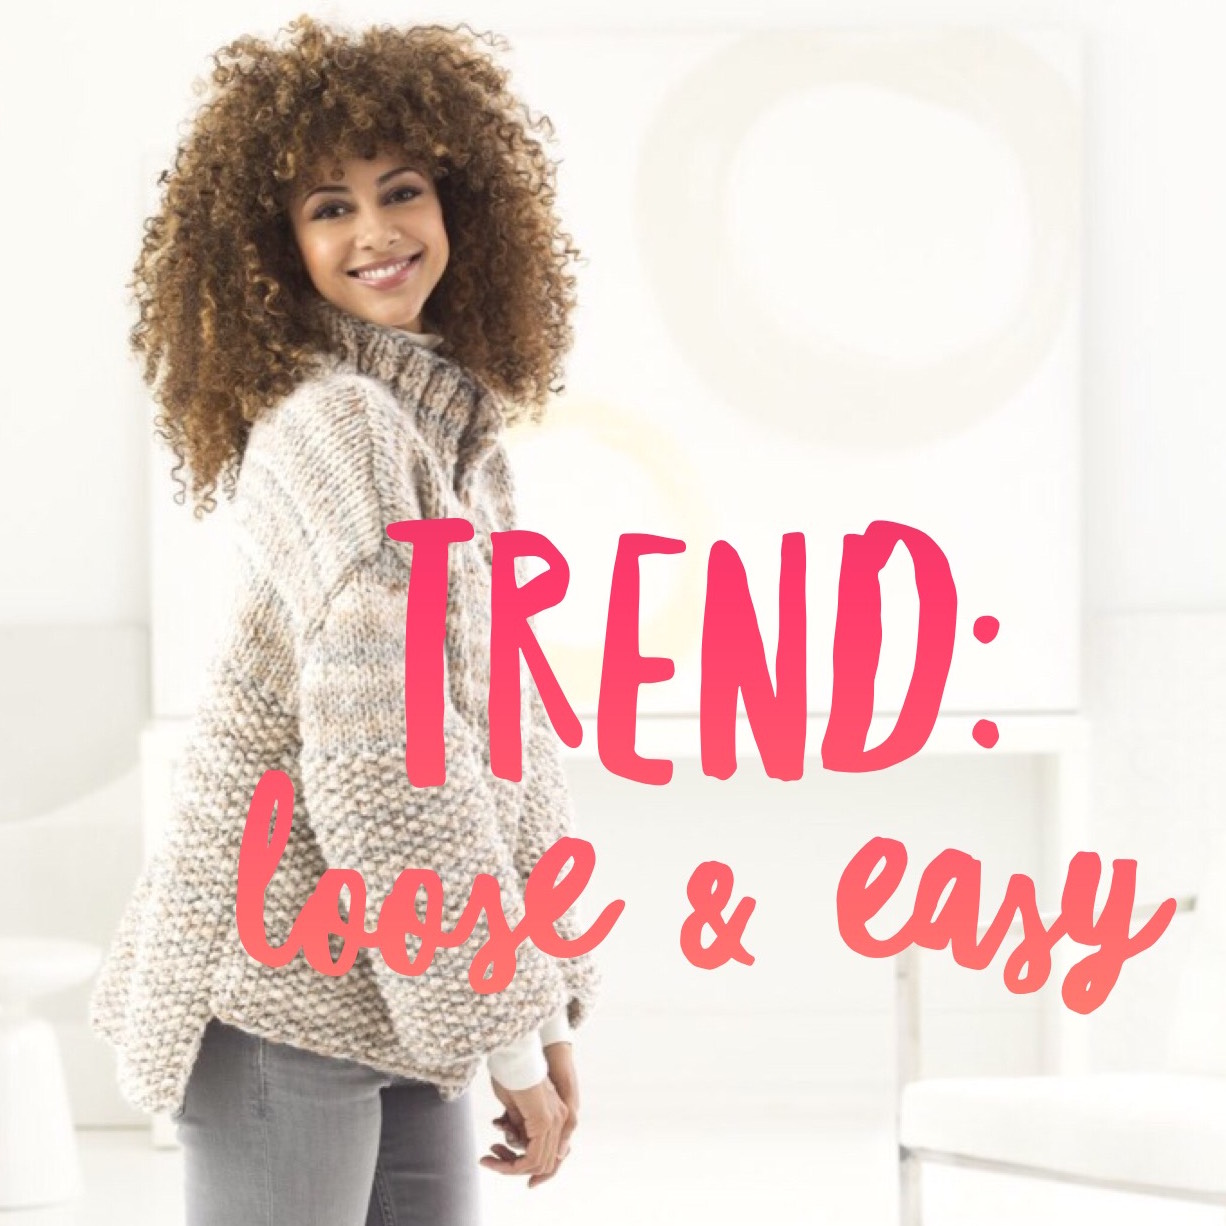 2018 Trends: Loose & Easy, + 18 Free Patterns